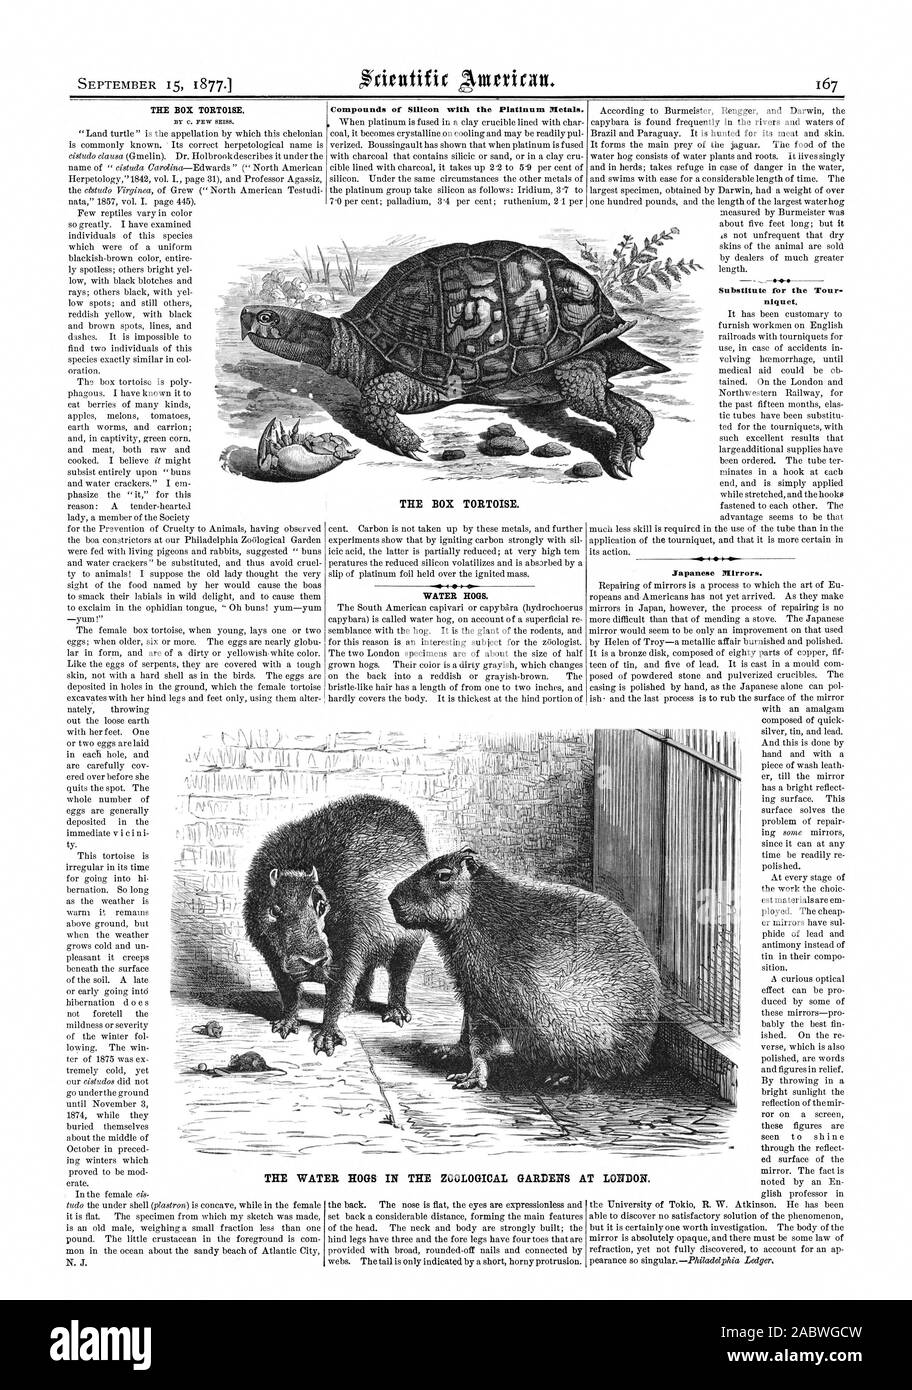 THE BOX TORTOISE. Compounds of Silicon with the Platinum Metals. WATER HOGS. Substitute for the Tour. niquet. Japanese Mirrors. THE BOX TORTOISE. THE WATER HOGS IN THE ZOOLOGICAL GARDENS AT LONDON., scientific american, 77-09-15 Stock Photo